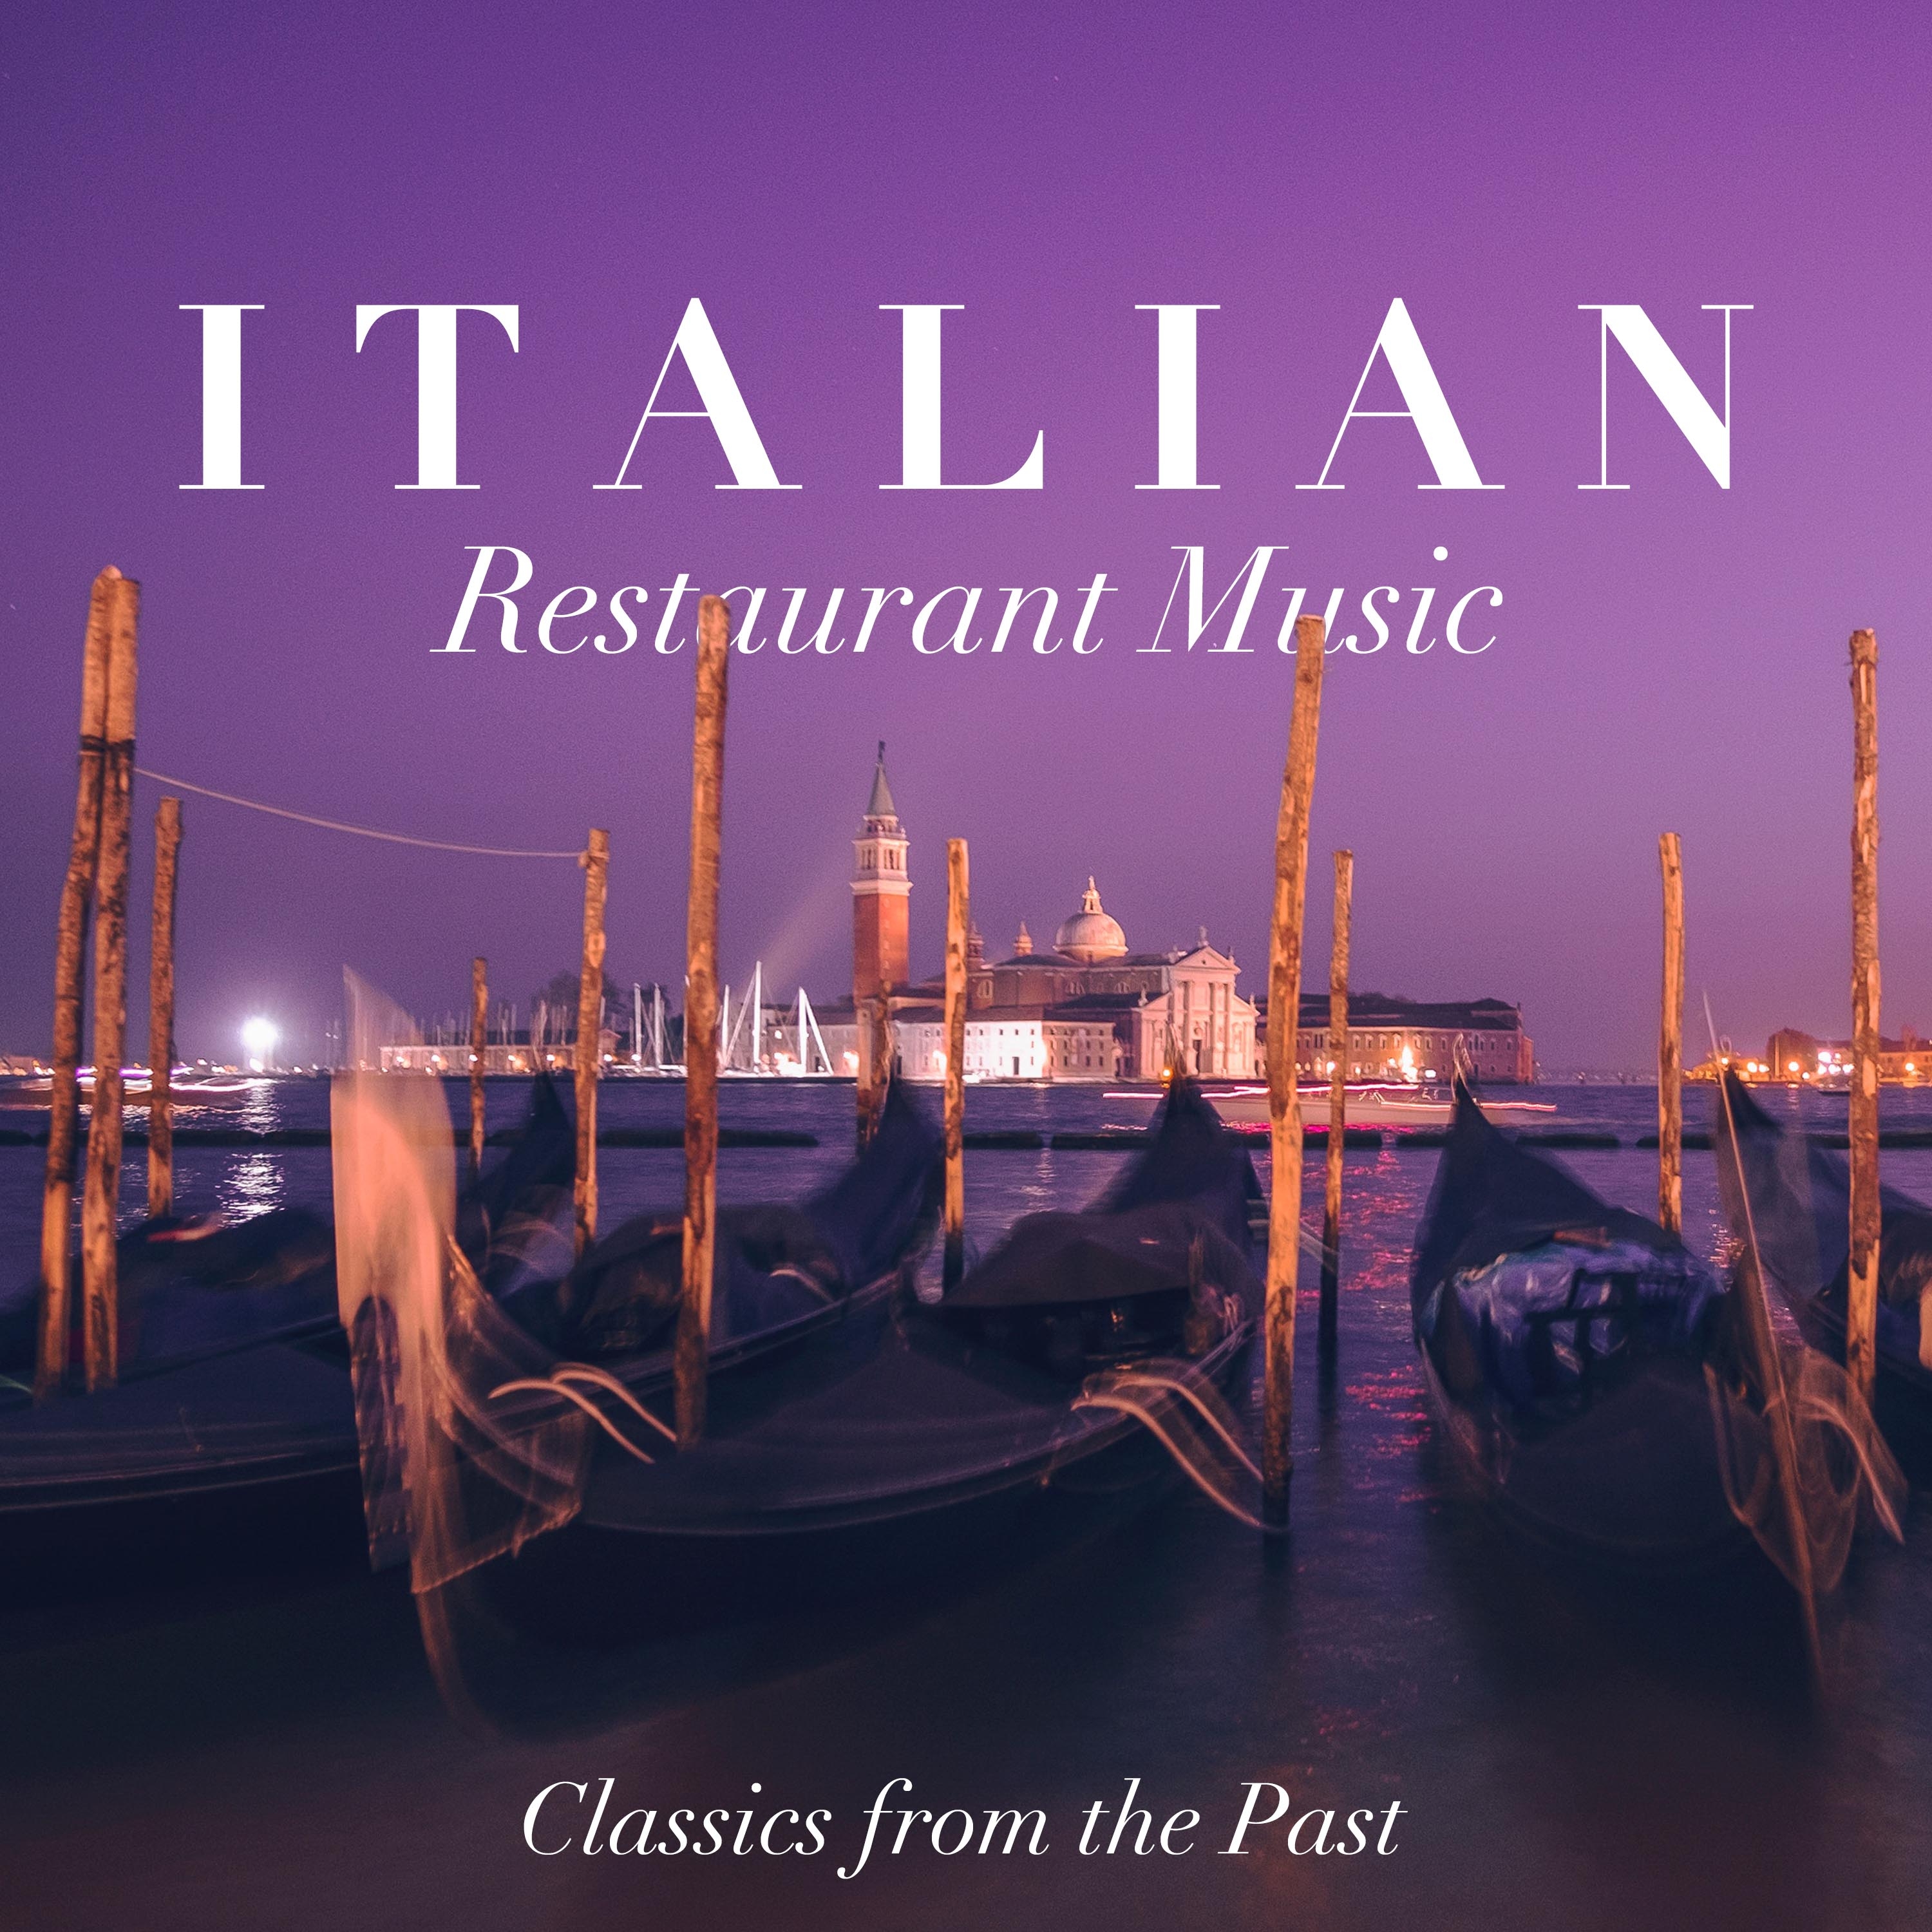 Italian Restaurant Music 2018 - Classics from the Past and The Very Best of Traditional Italian Music